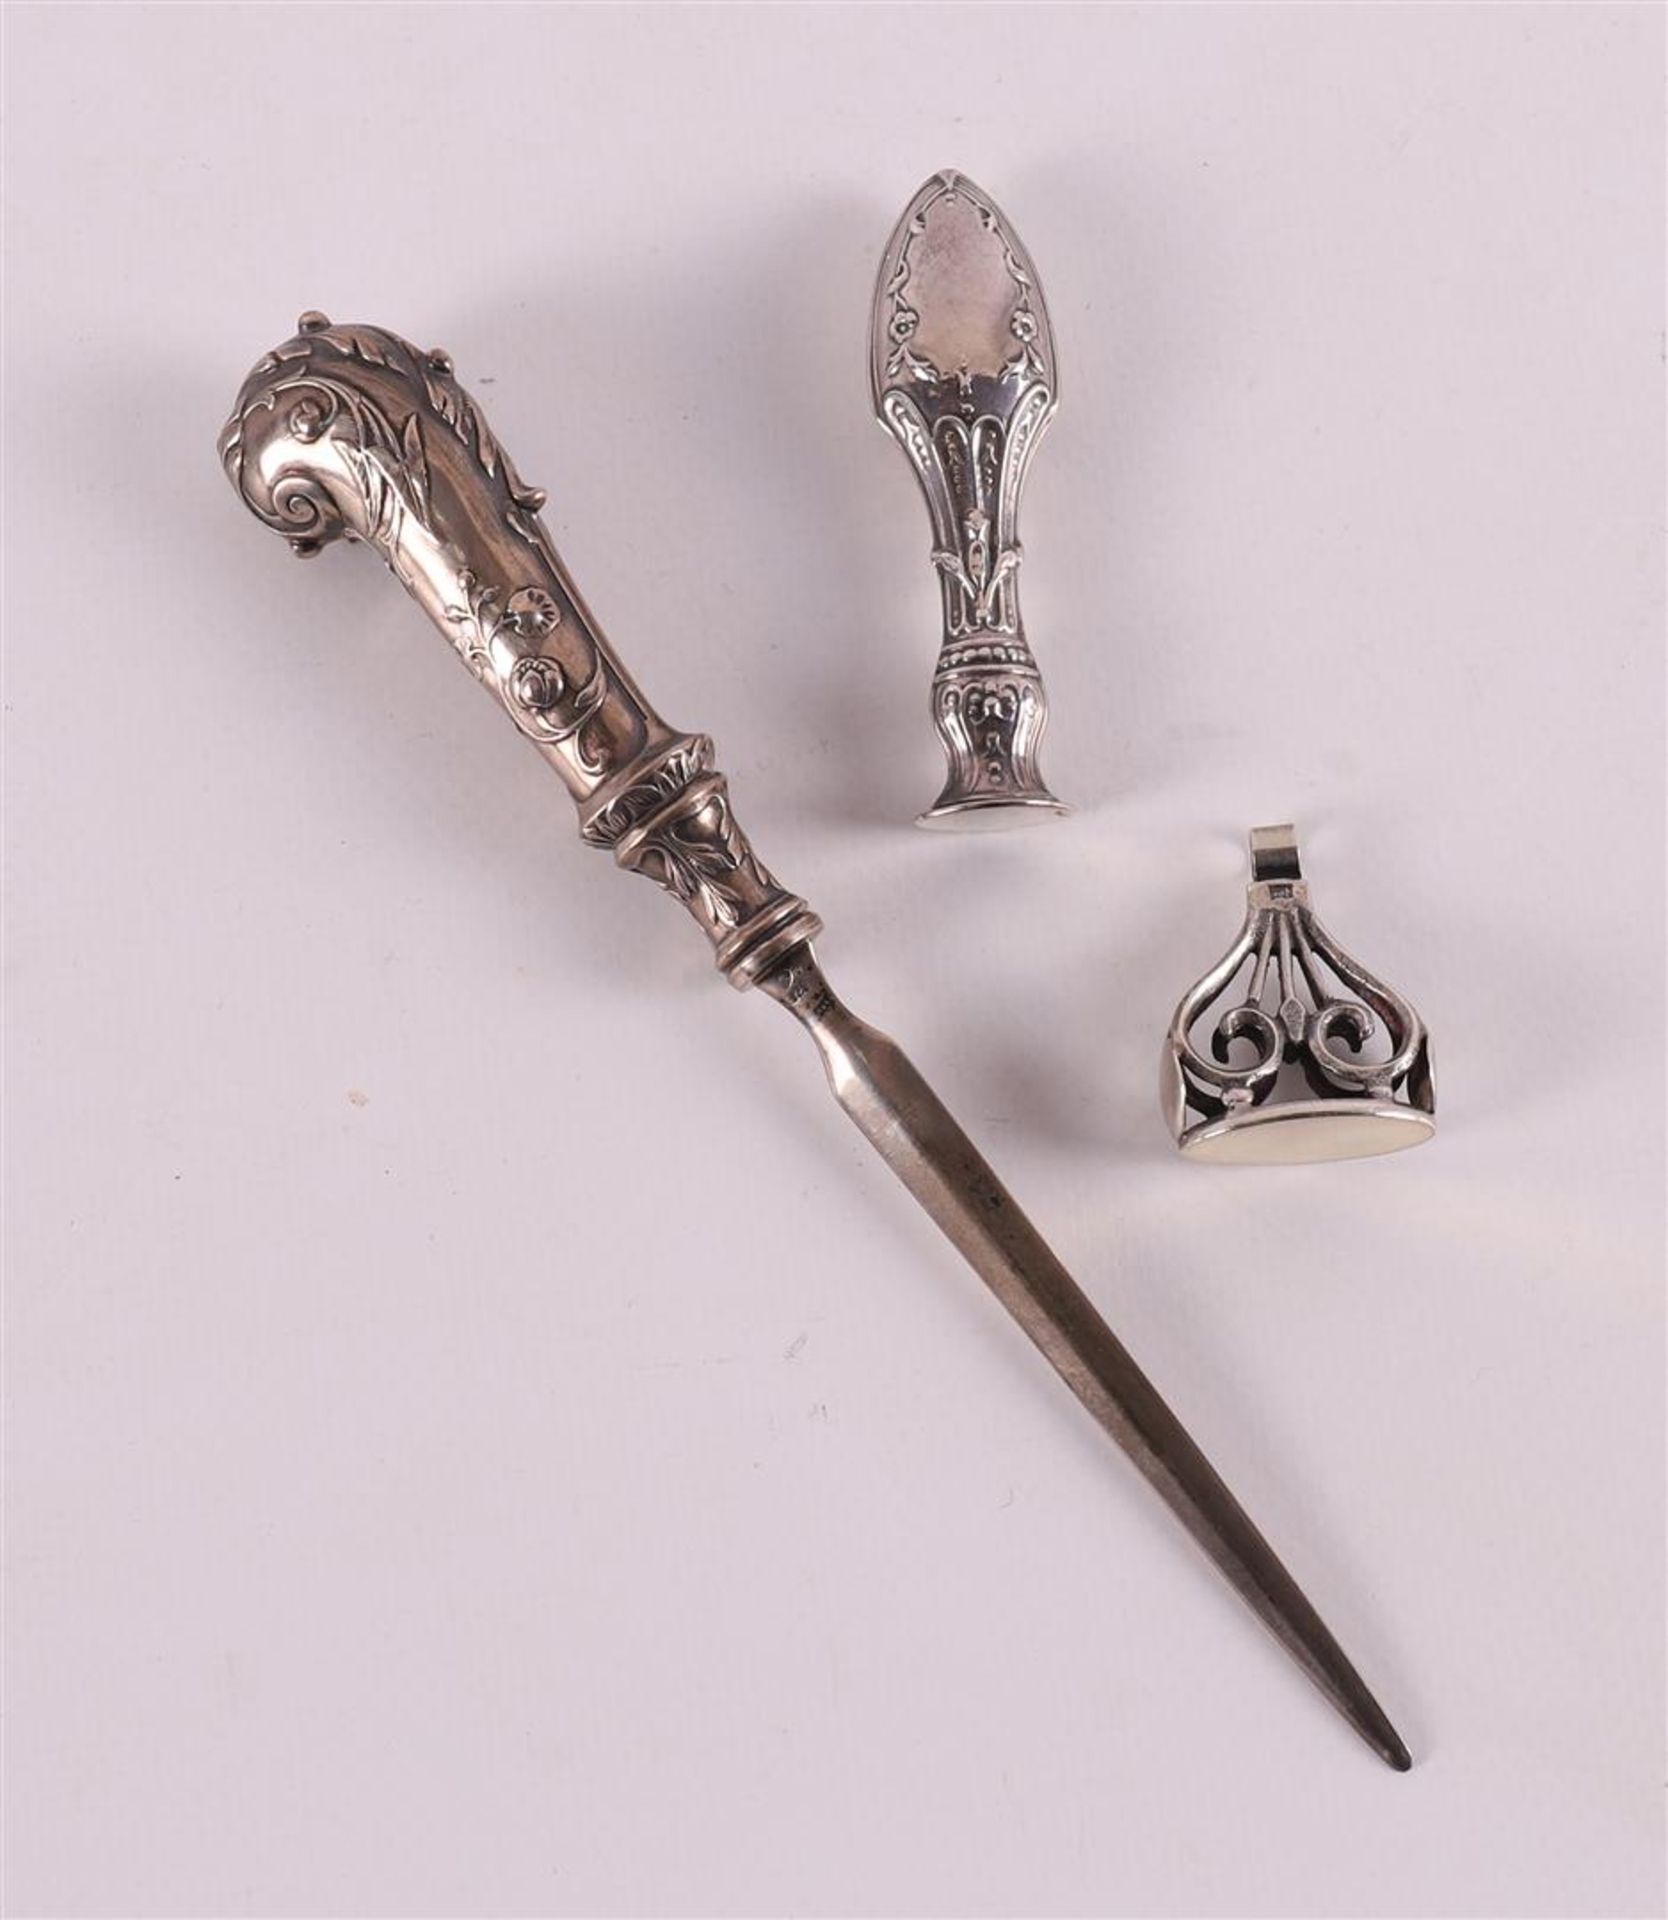 A first grade 925/1000 silver letter opener on a pistol grip, around 1900.